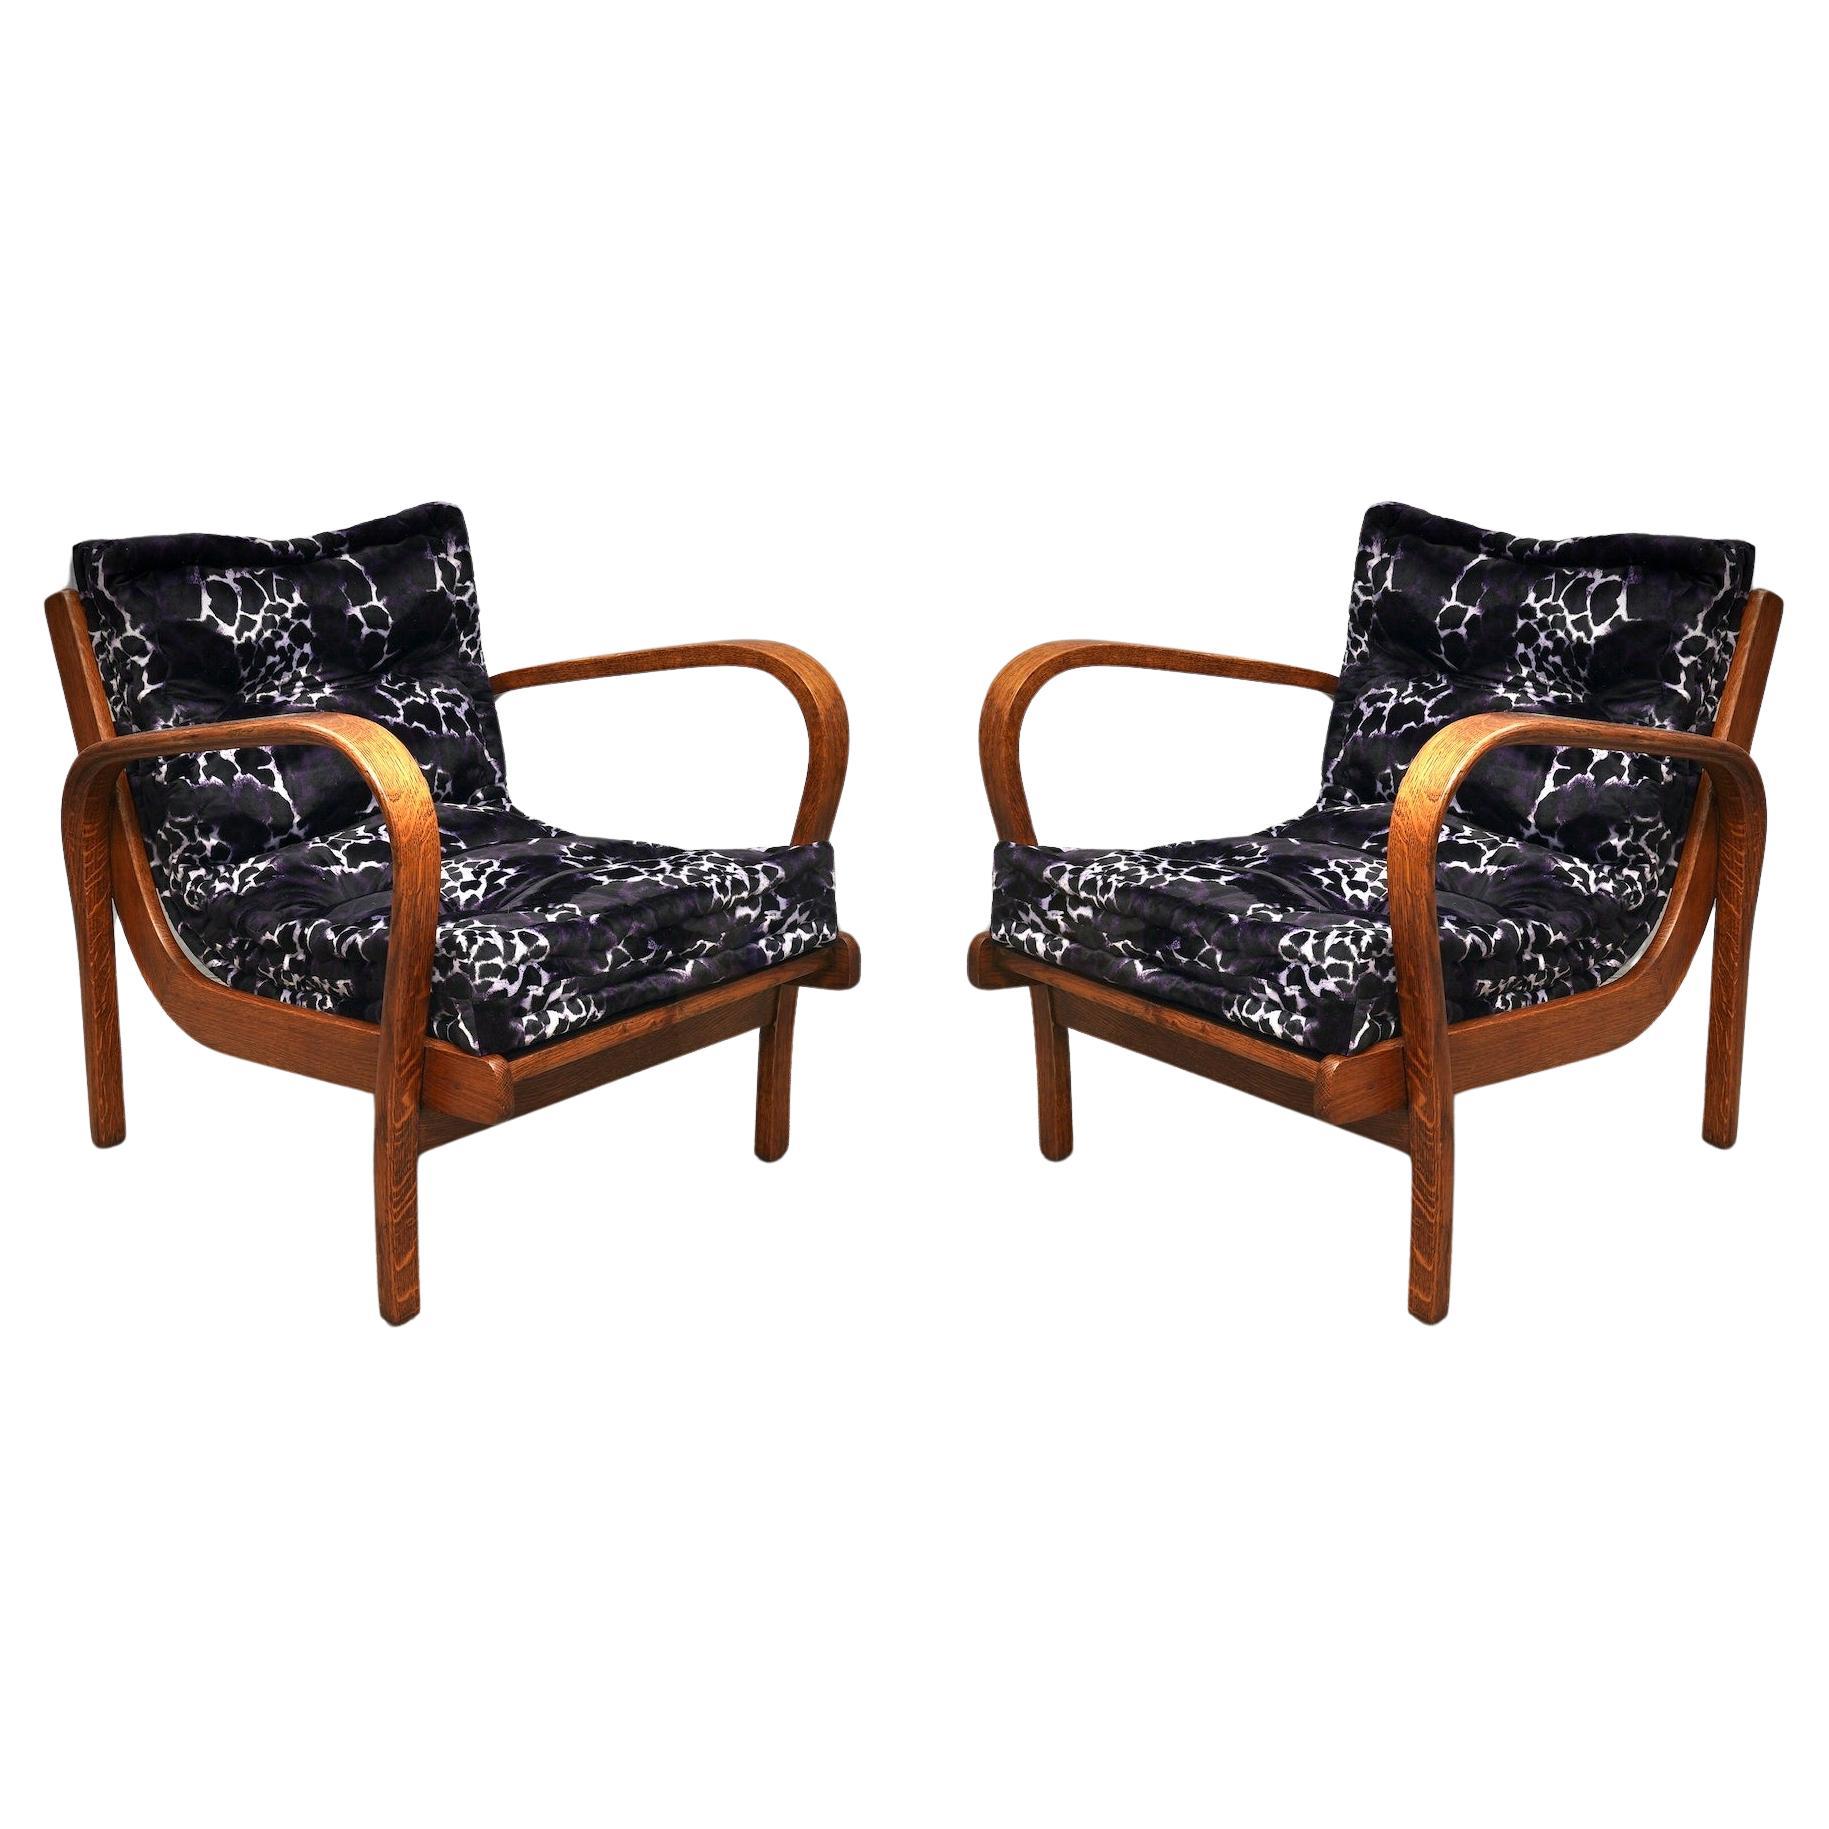 Midcentury Ash Wood and Fabric Italian Club Chairs  Armchairs, 1950 For Sale